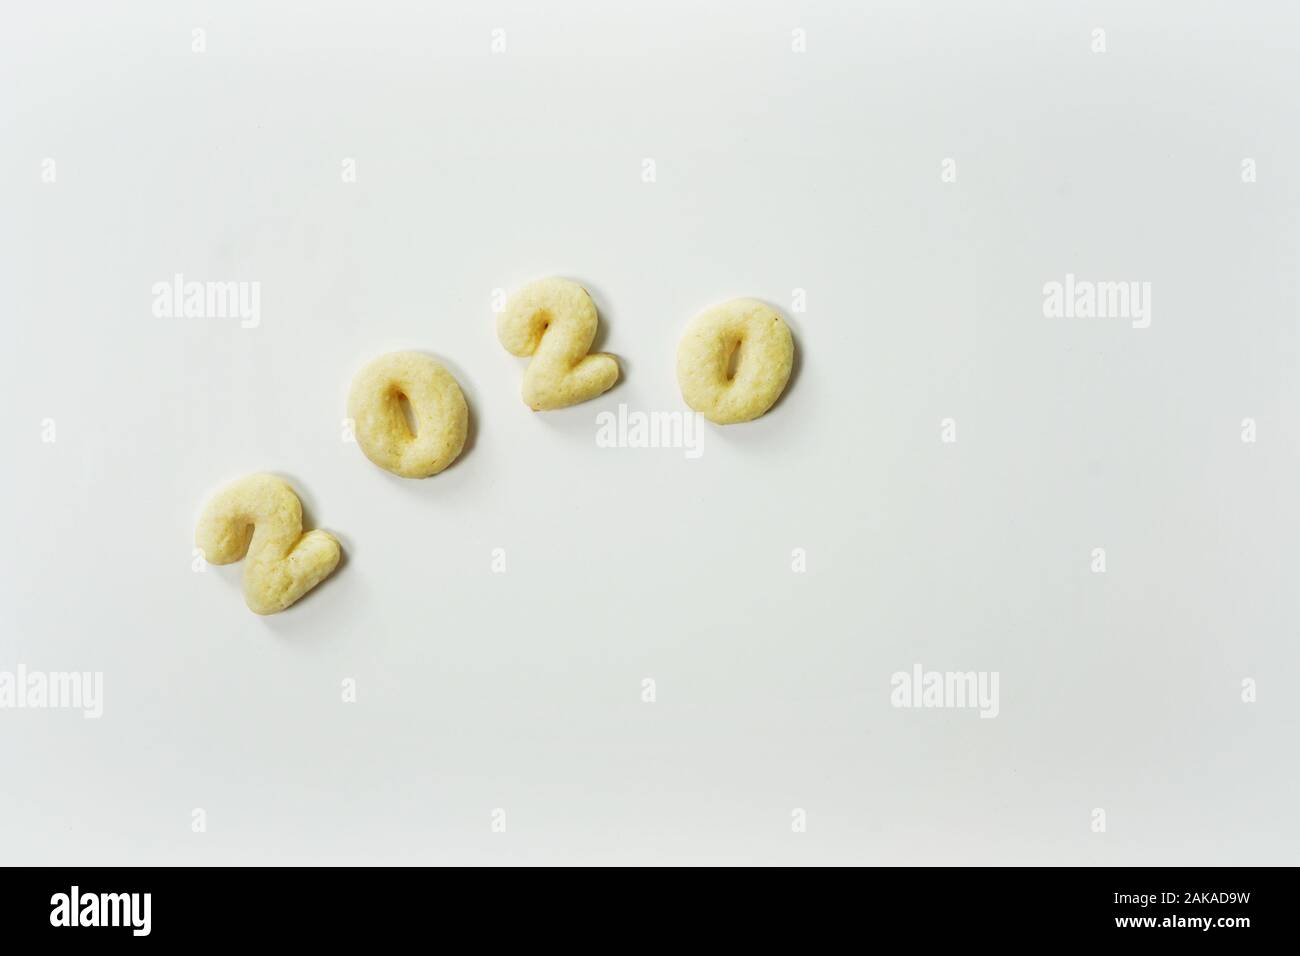 New year 2020 sugar cookies isolated on white with copy space Stock Photo